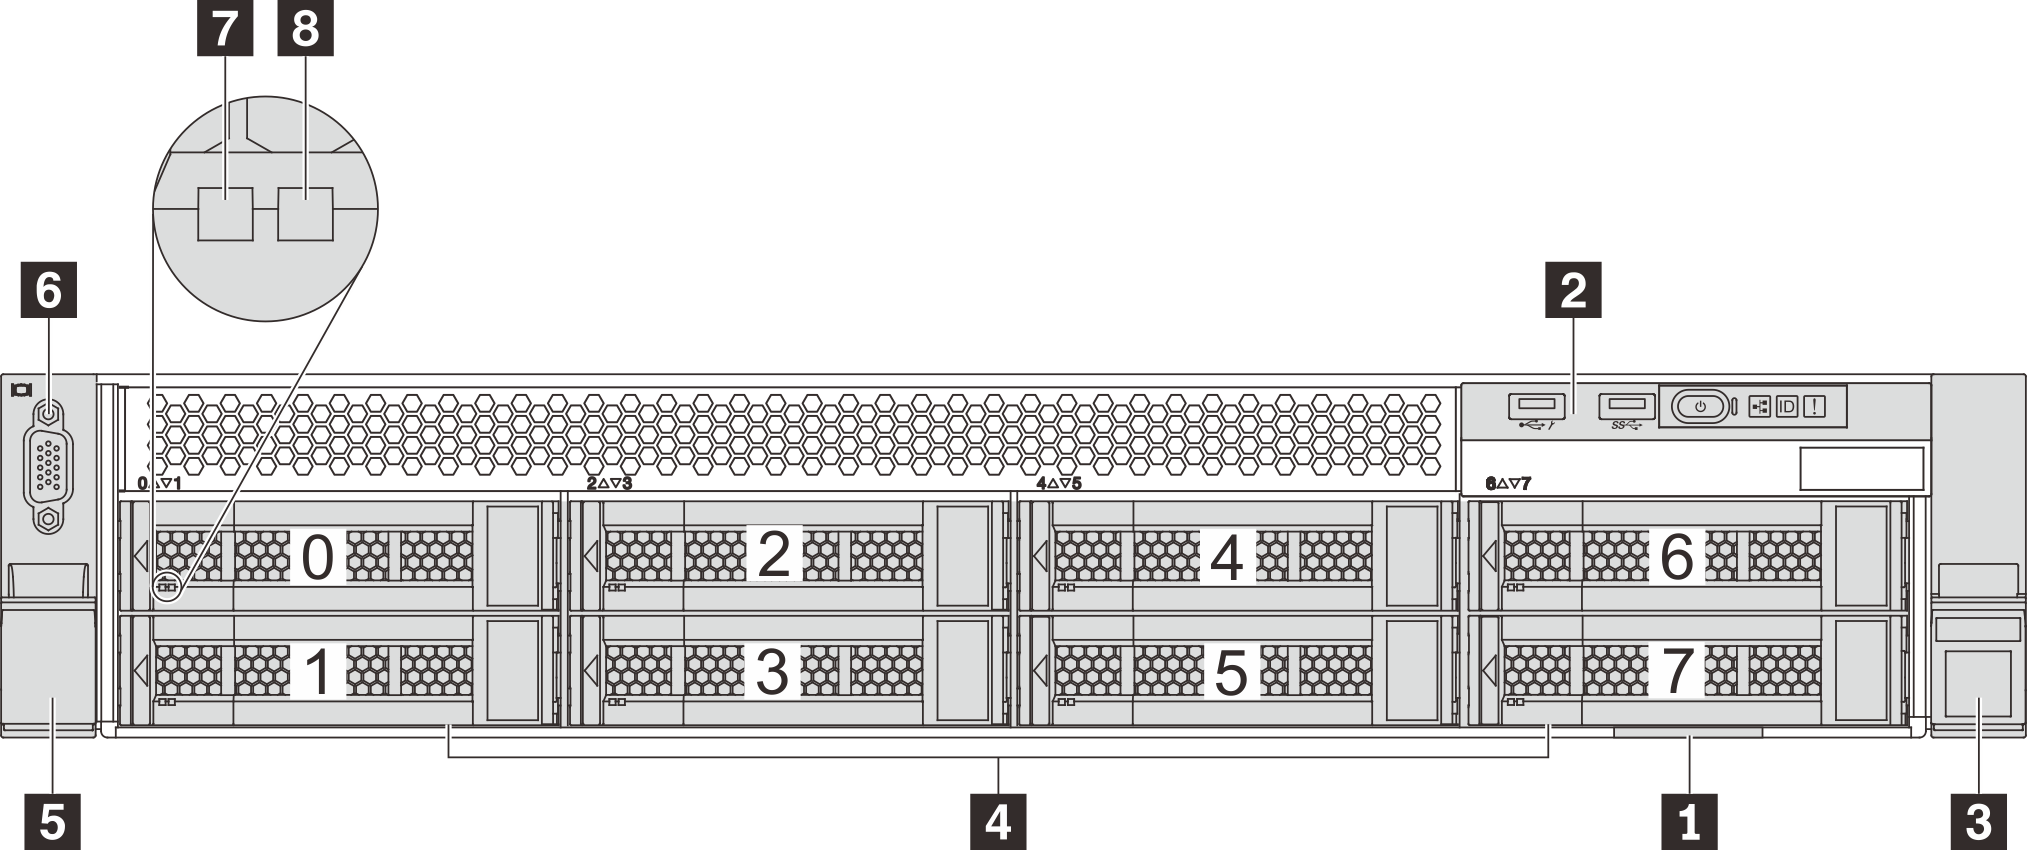 Front view of server models with eight 3.5-inch drive bays (0–7)